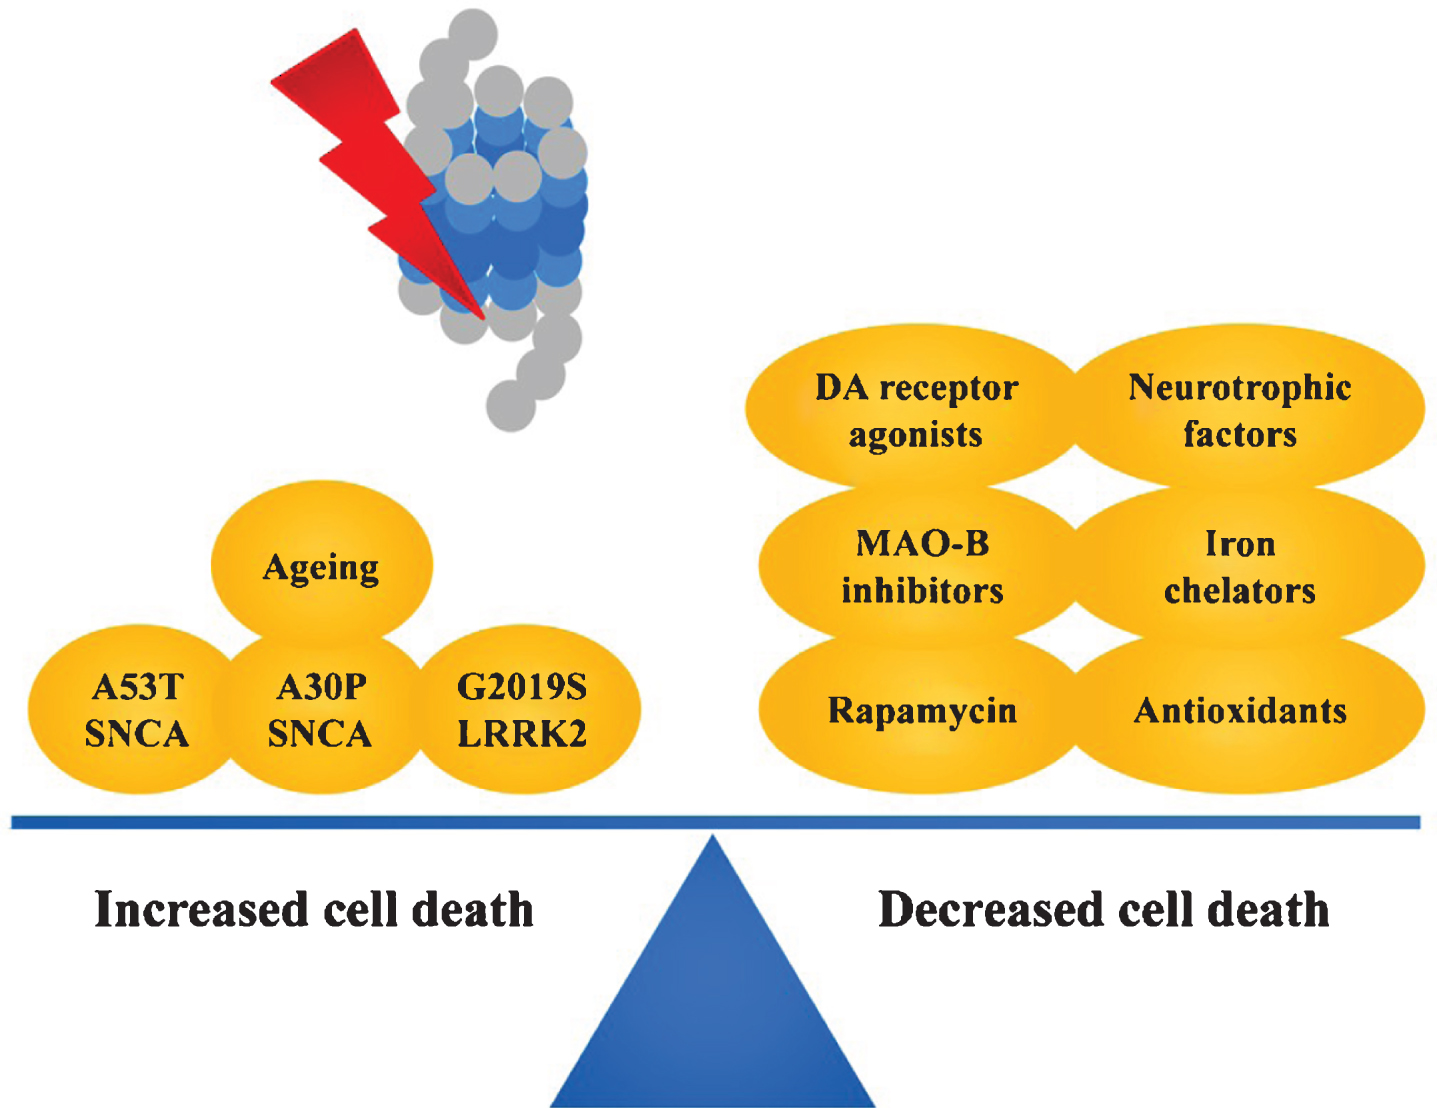 Factors influencing cell death following application of proteasome inhibitors. See text for details.